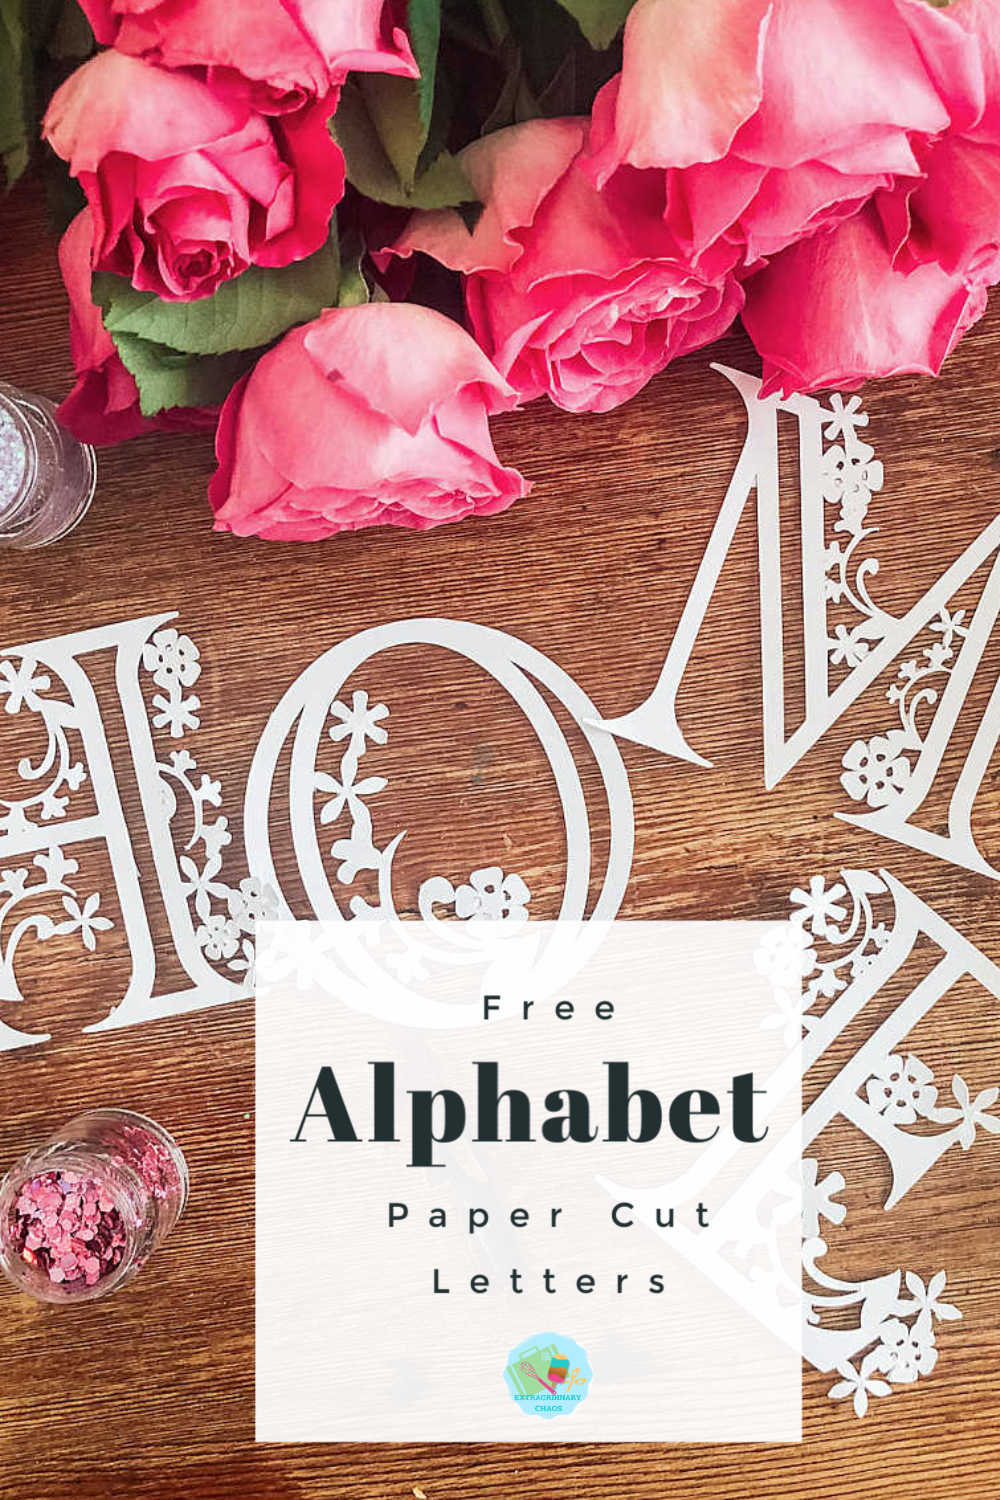 Free Cricut Floral Alphabet Templates For Paper And Vinyl to cut on the cricut maker, explore and Cricut Joy. Great for cutting out gifts or paper cuts to sell